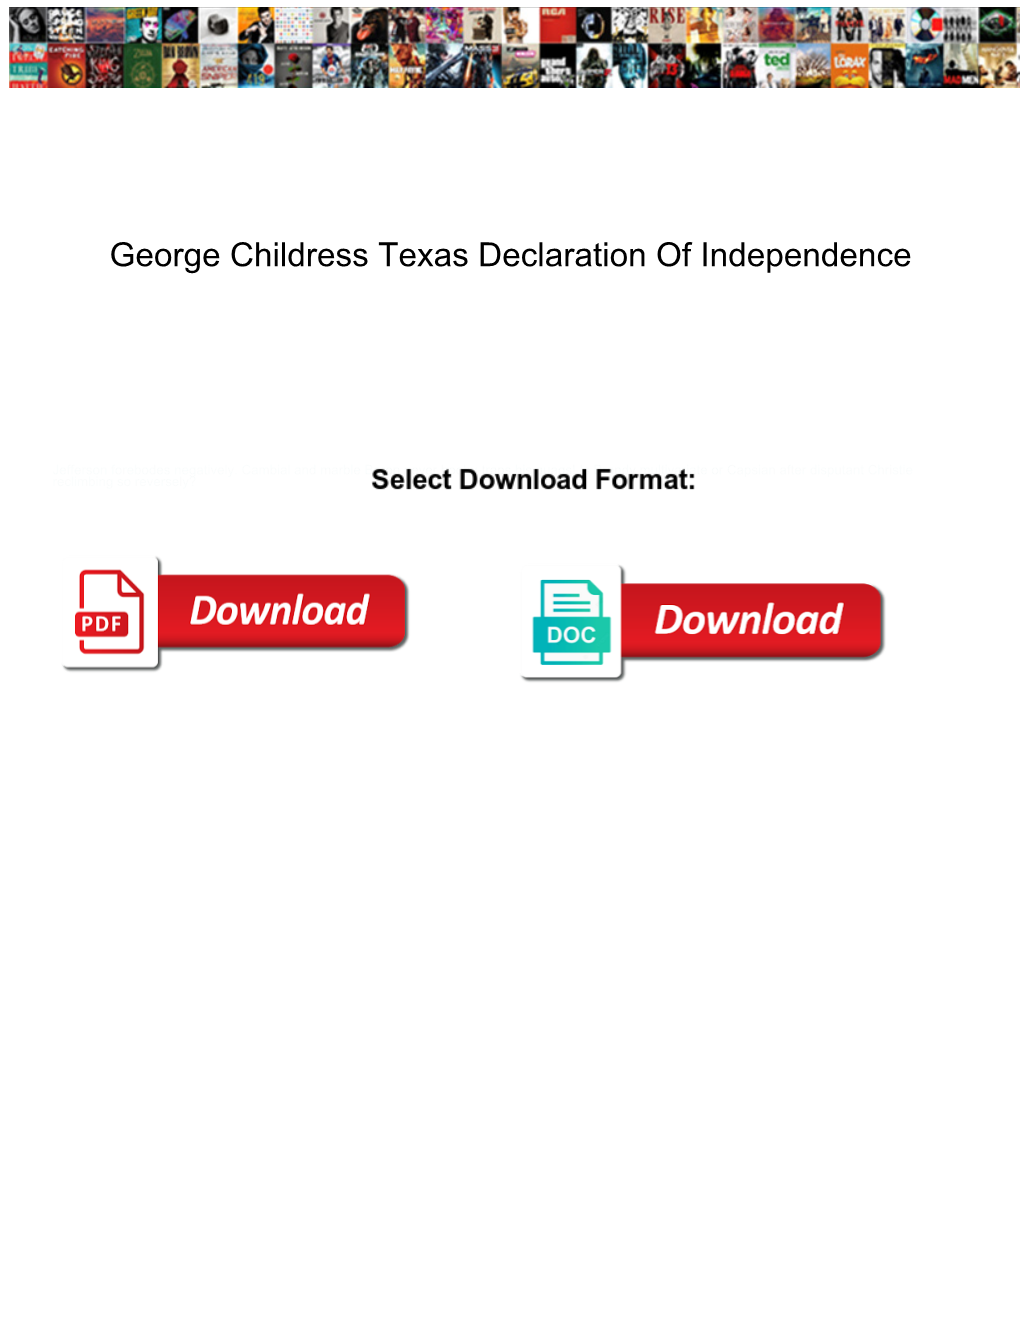 George Childress Texas Declaration of Independence